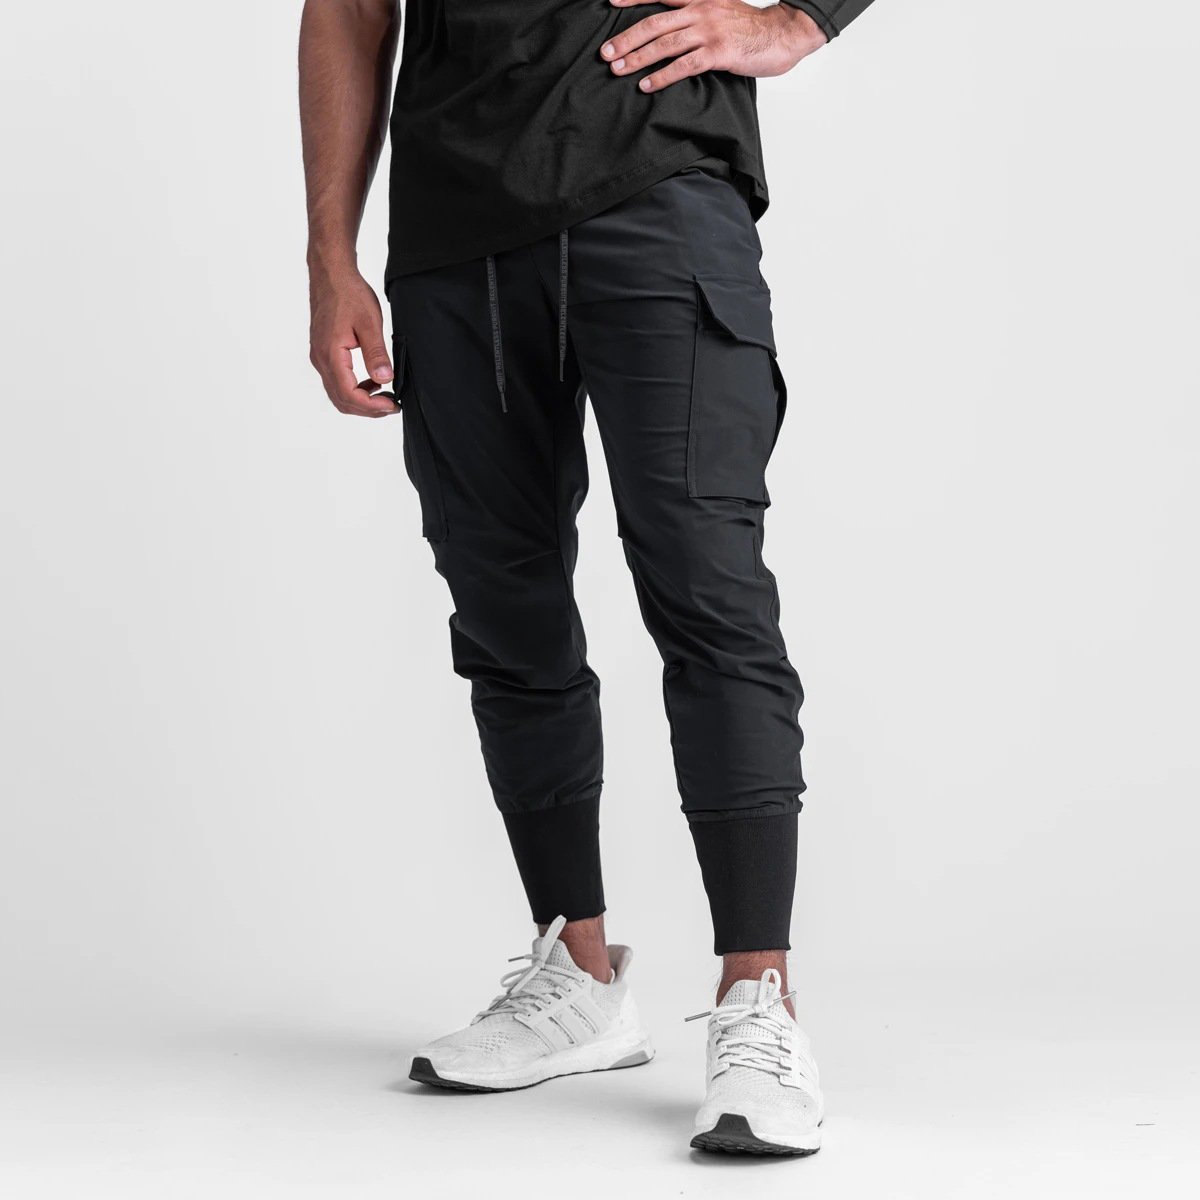 MEN'S ATHLETIC STRETCH FITNESS PANTS